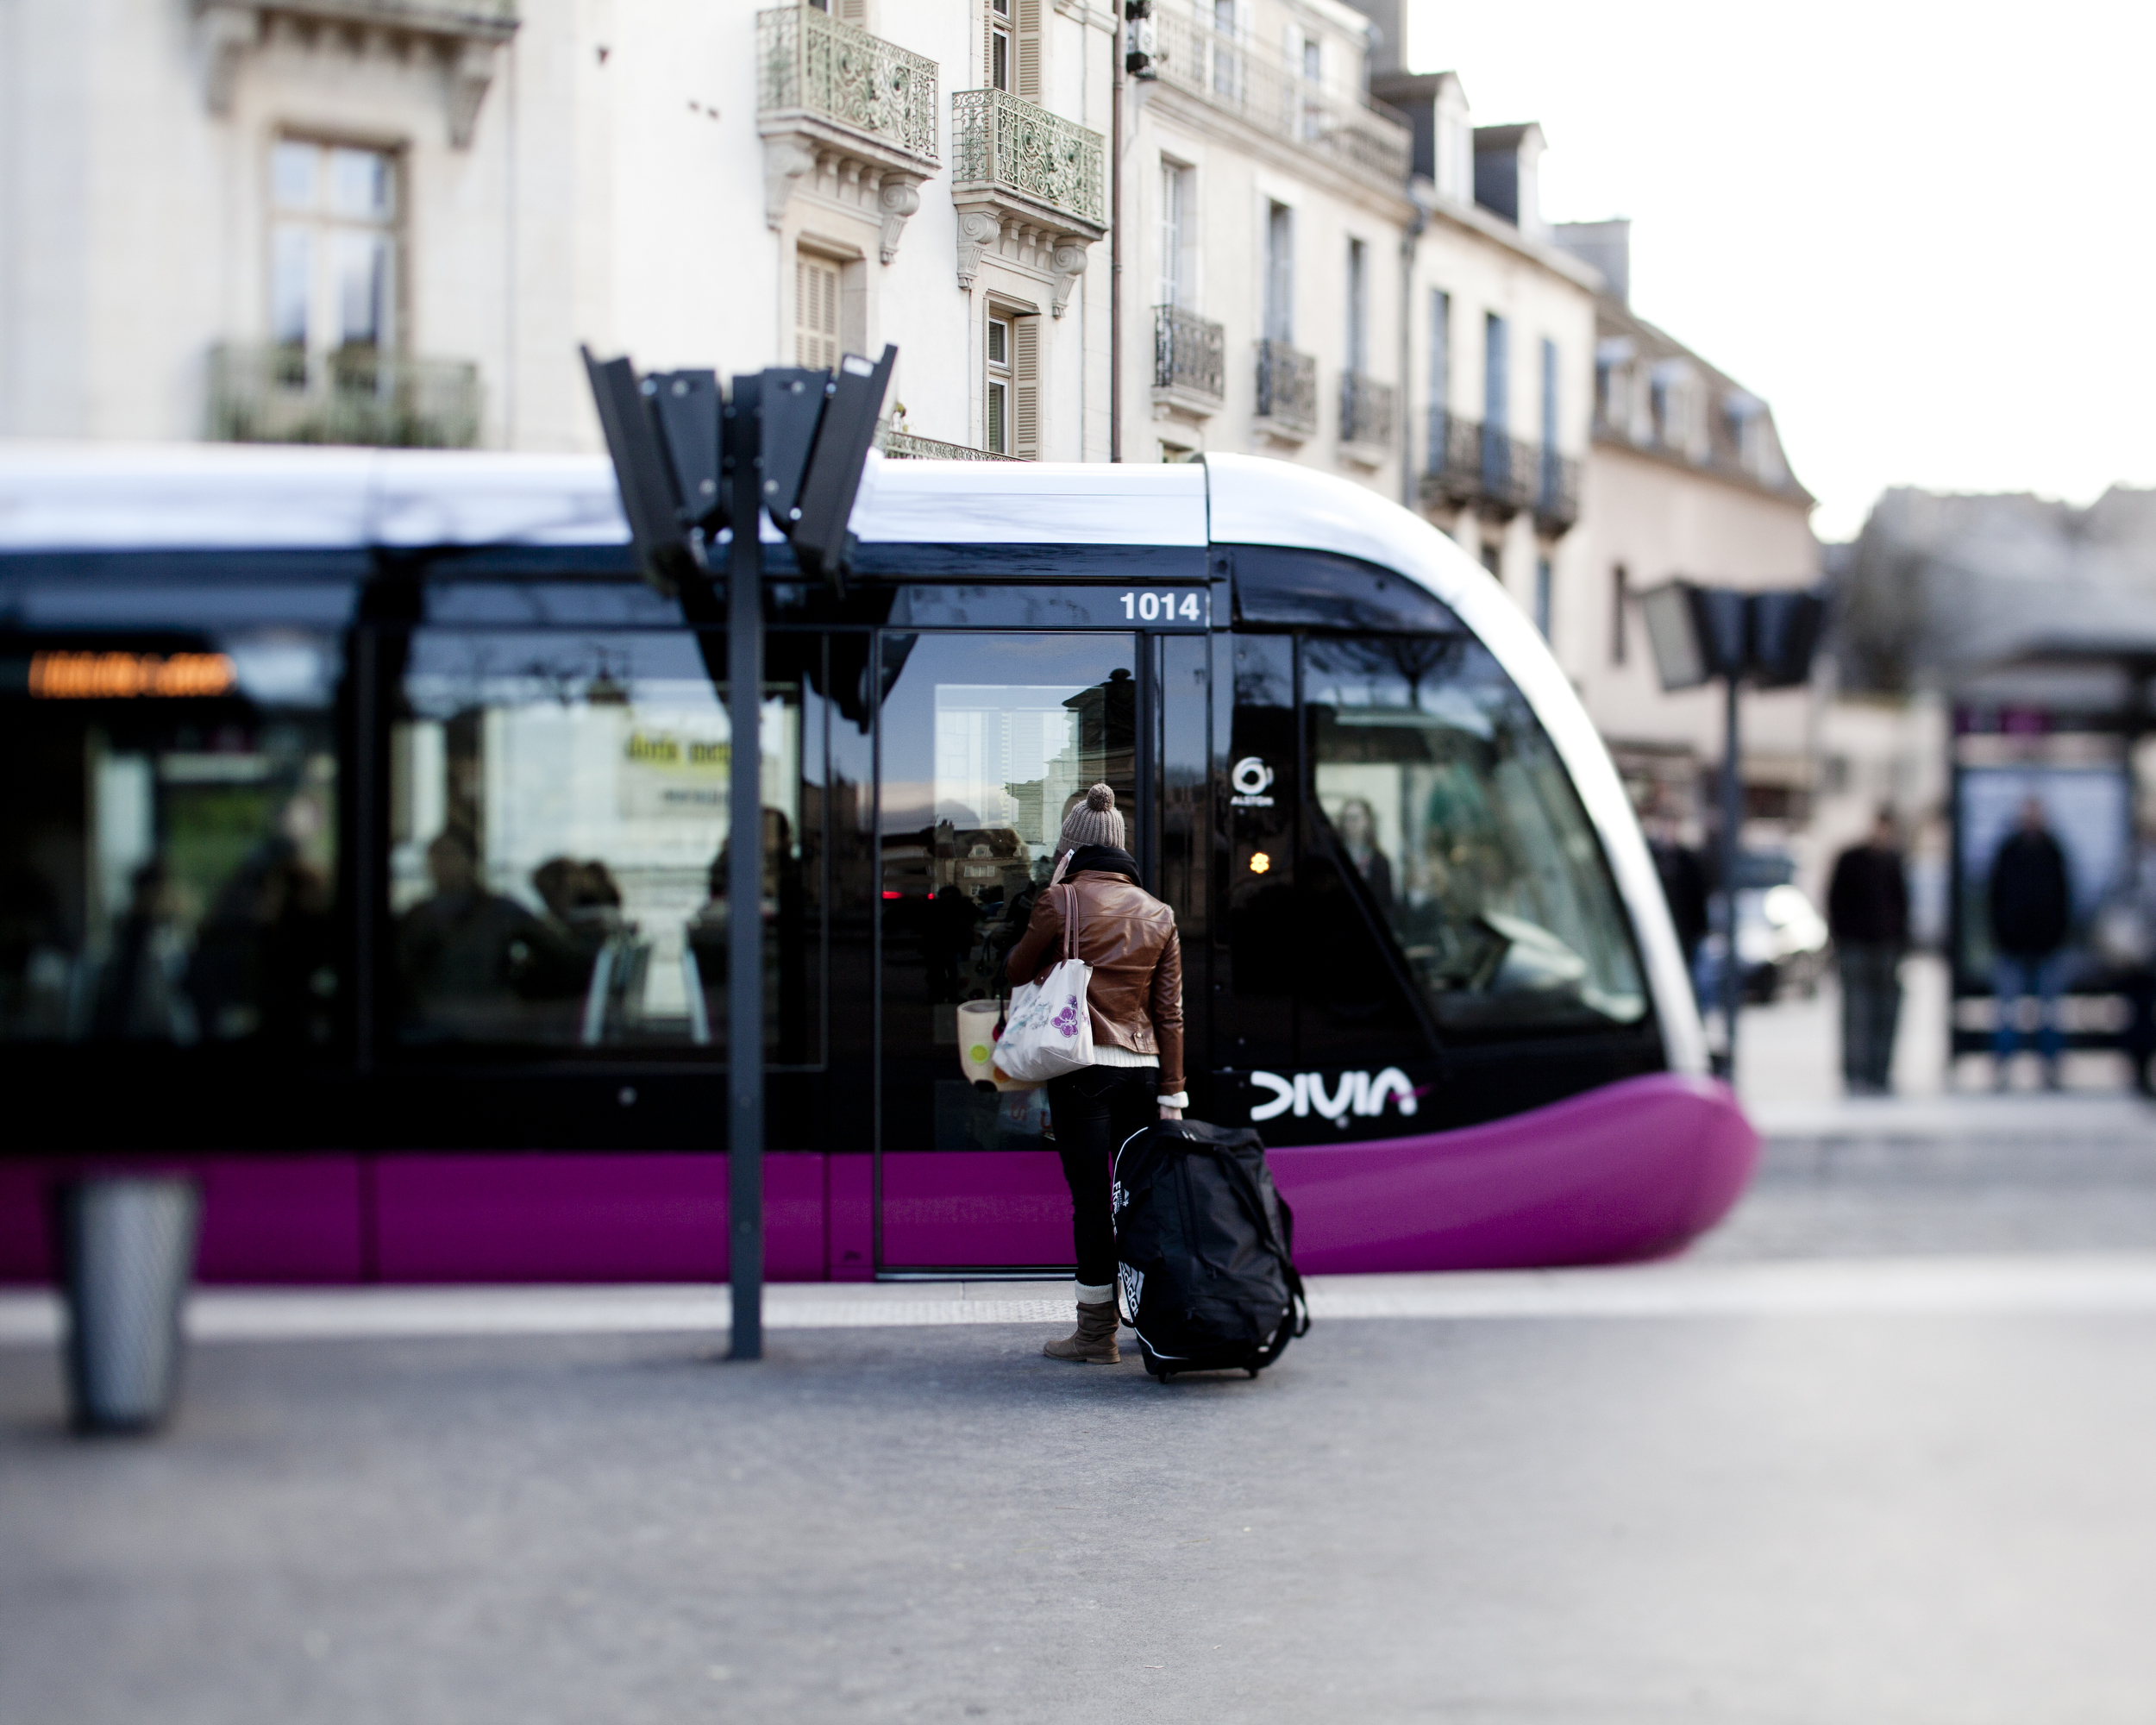 Tramway operated by Keolis in Dijon